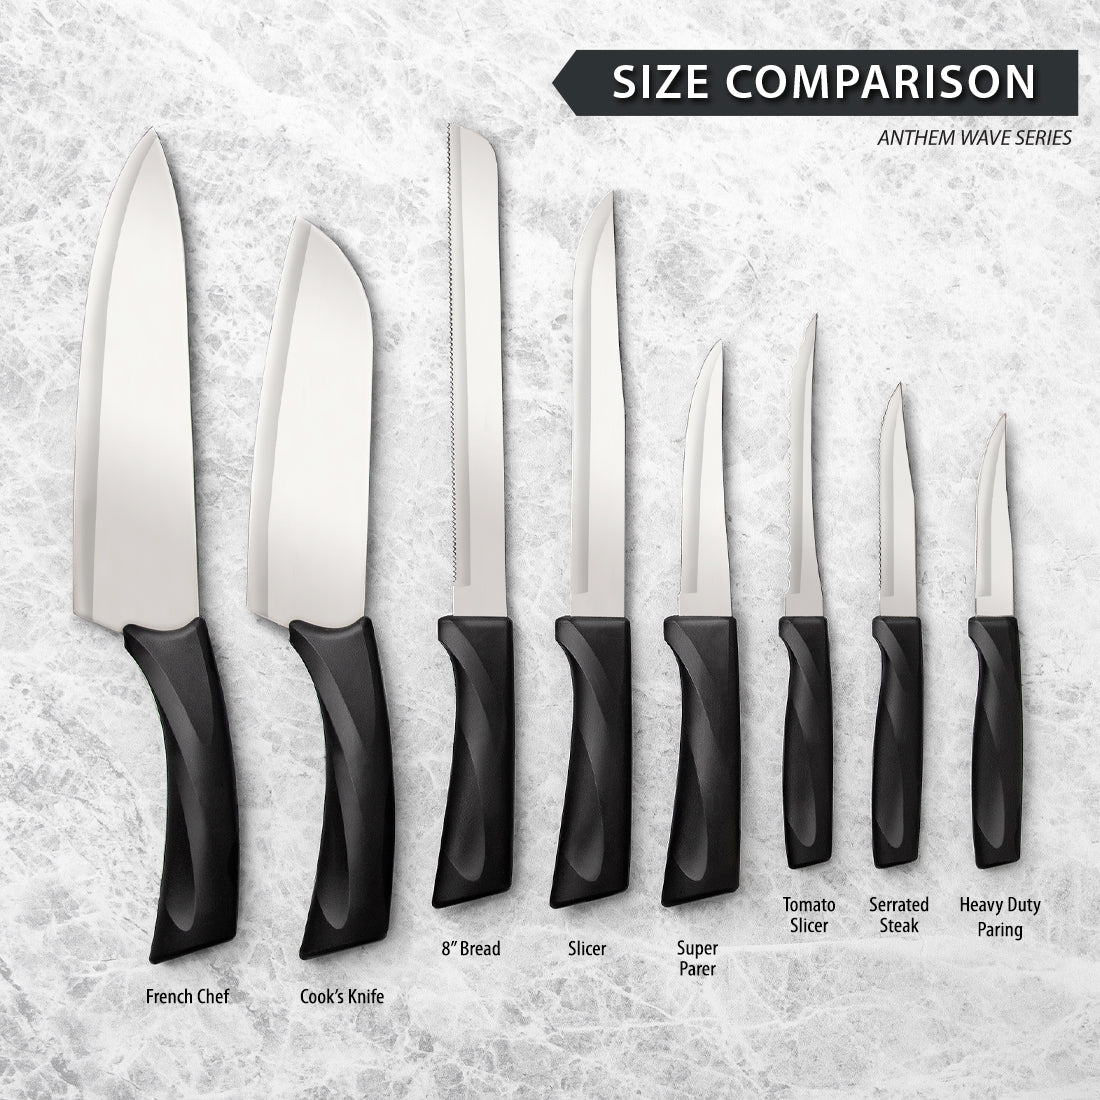 The free GINSU knife is back! Get a free 5 Chef's Knife with